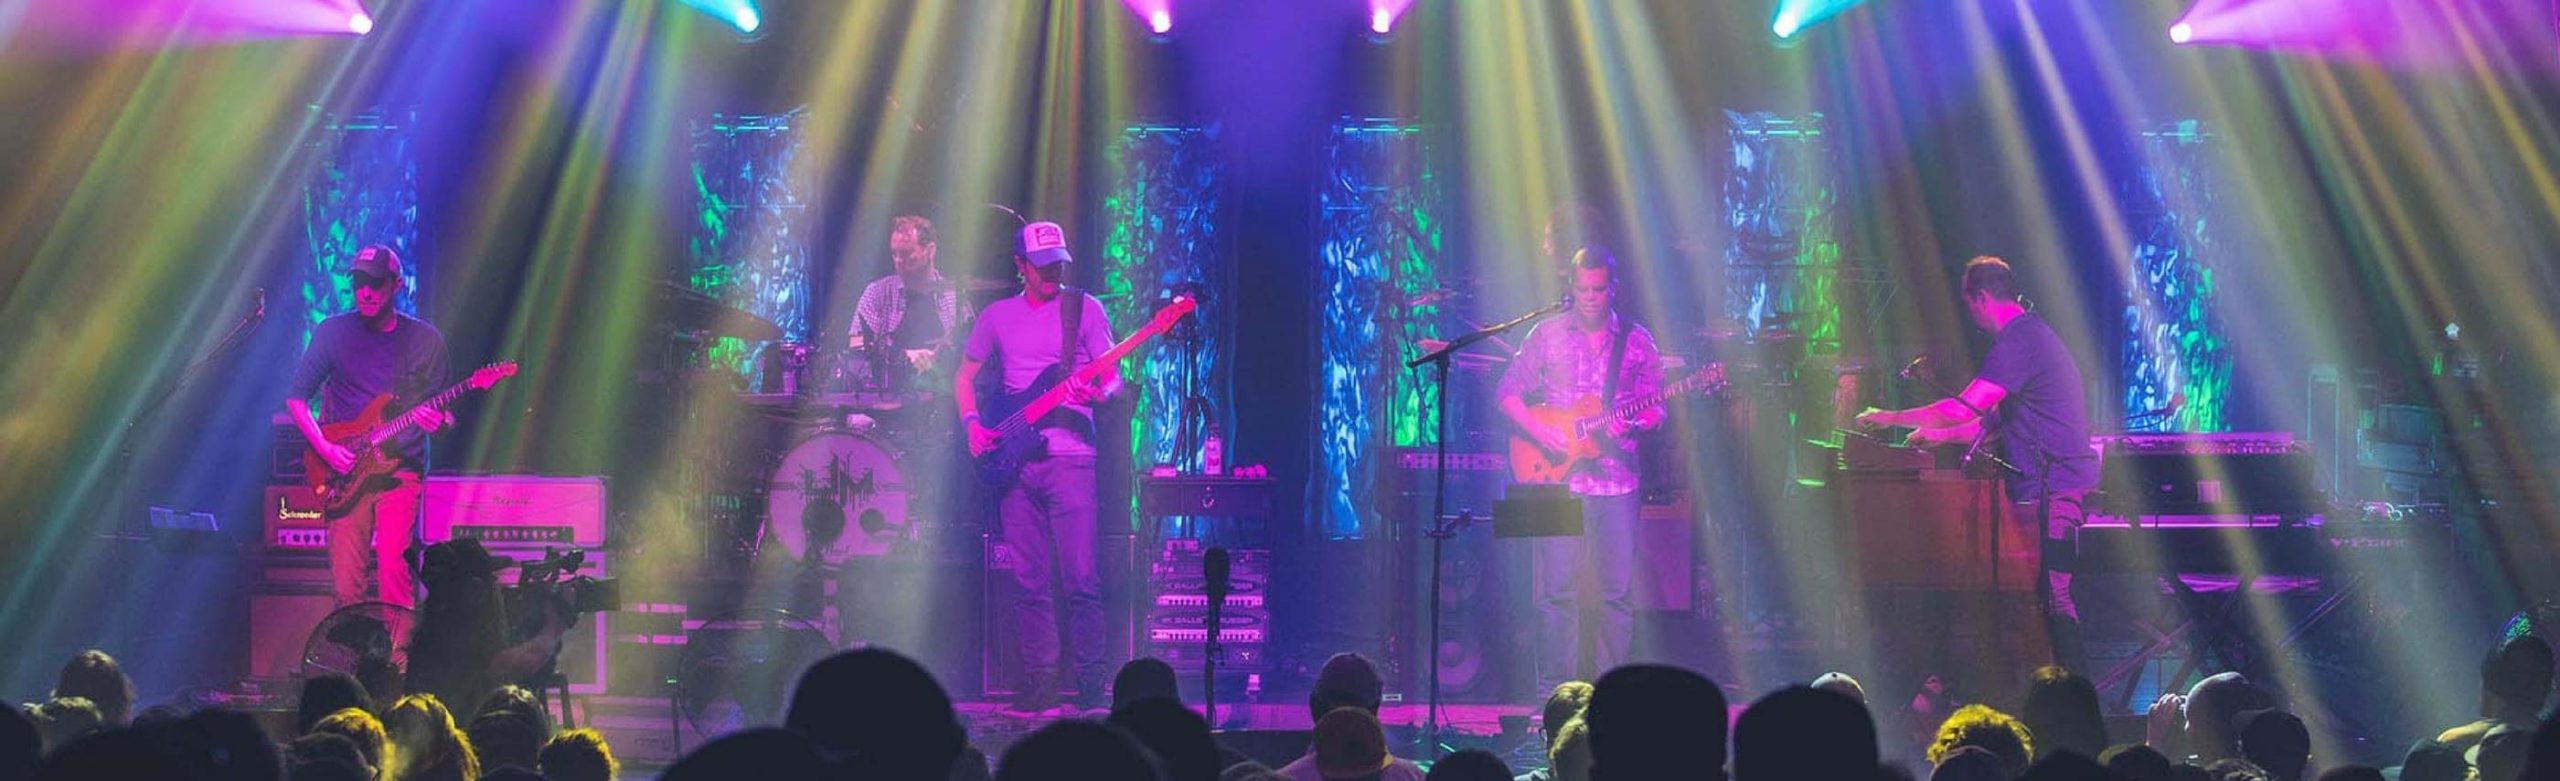 Event Info: Umphrey’s McGee at The Wilma Image